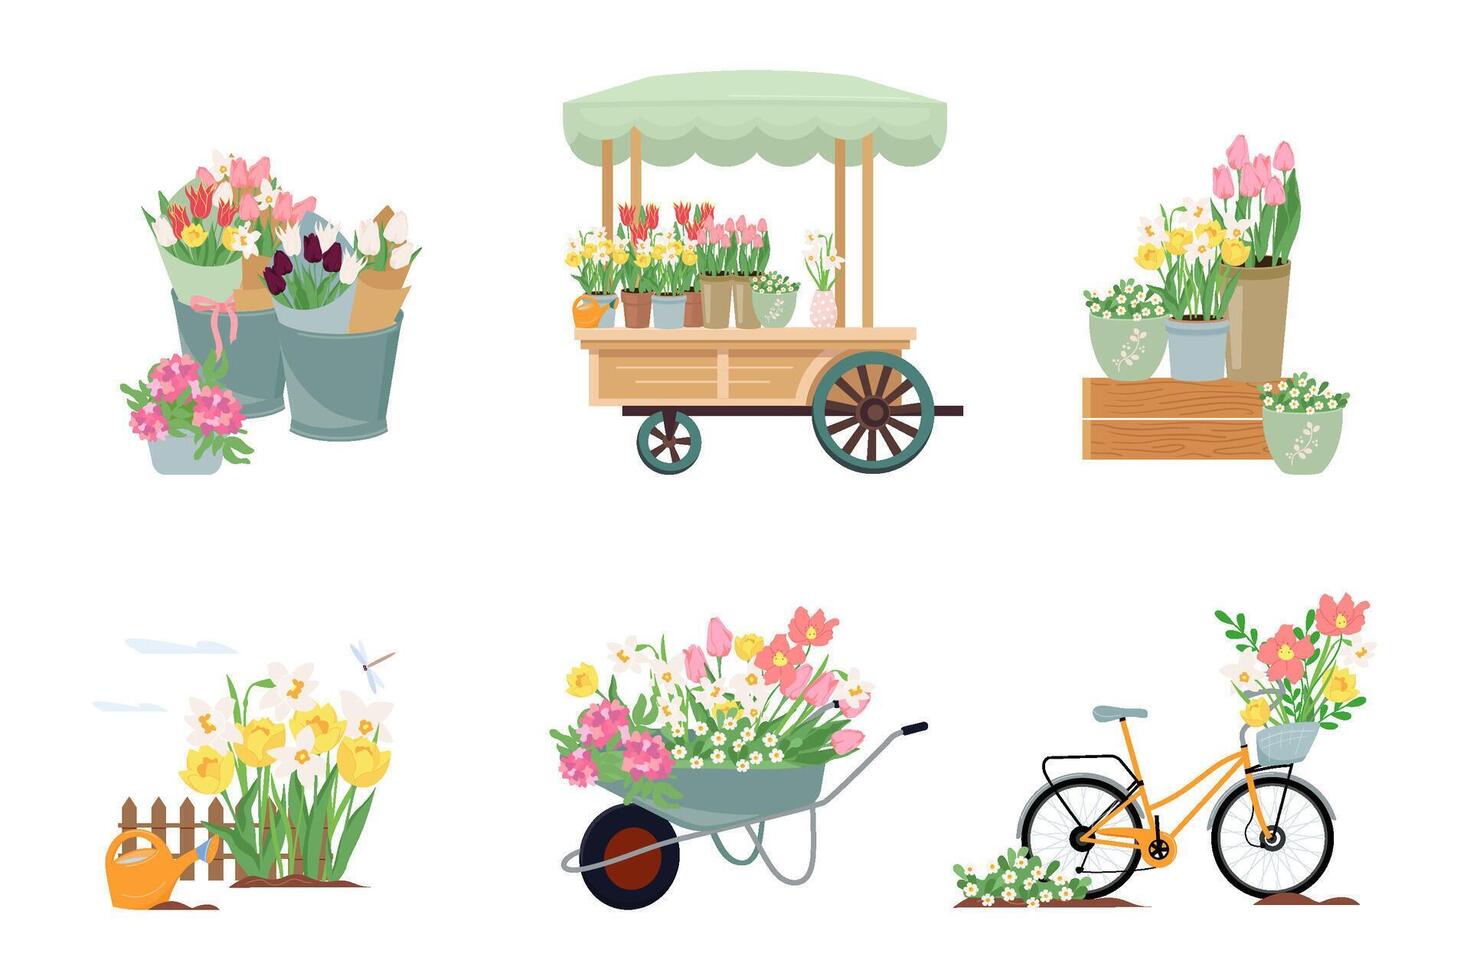 Spring flowers compositions set isolated on white. Flower cart, garden wheelbarrow, cyclist with bouquets. Vector illustrations are suitable for greeting cards, stickers, clothing prints and covers.